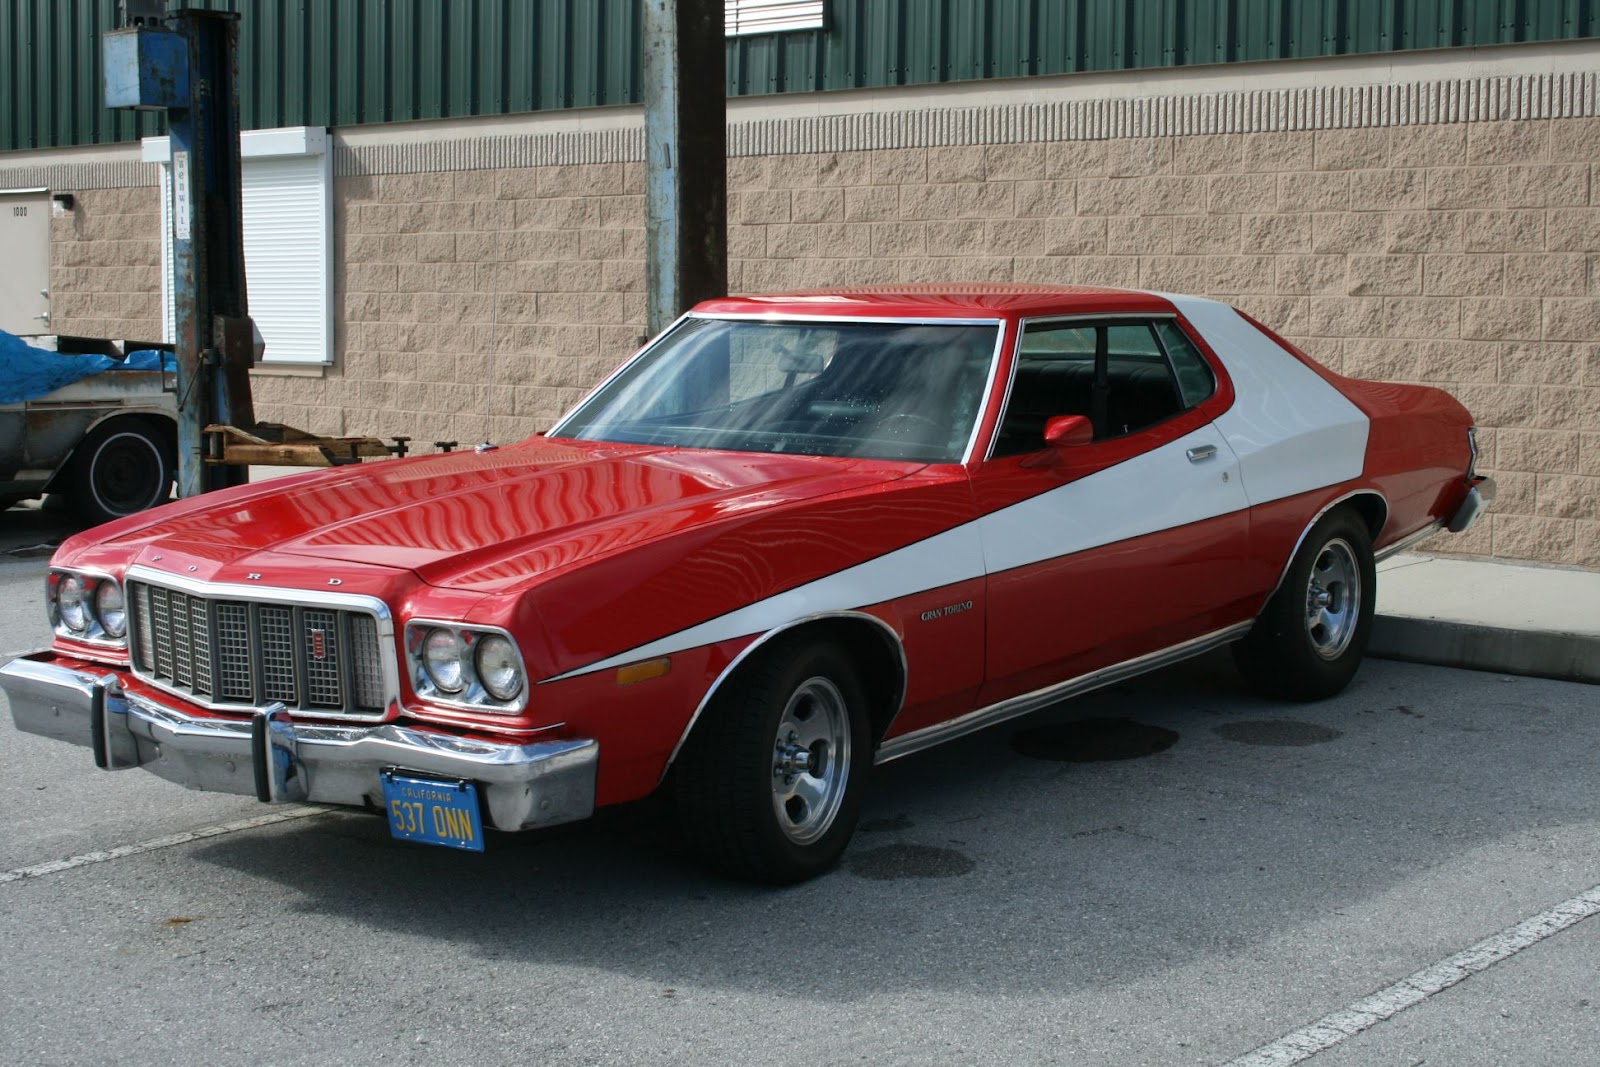 Used 1976 ford gran torino for sale #7